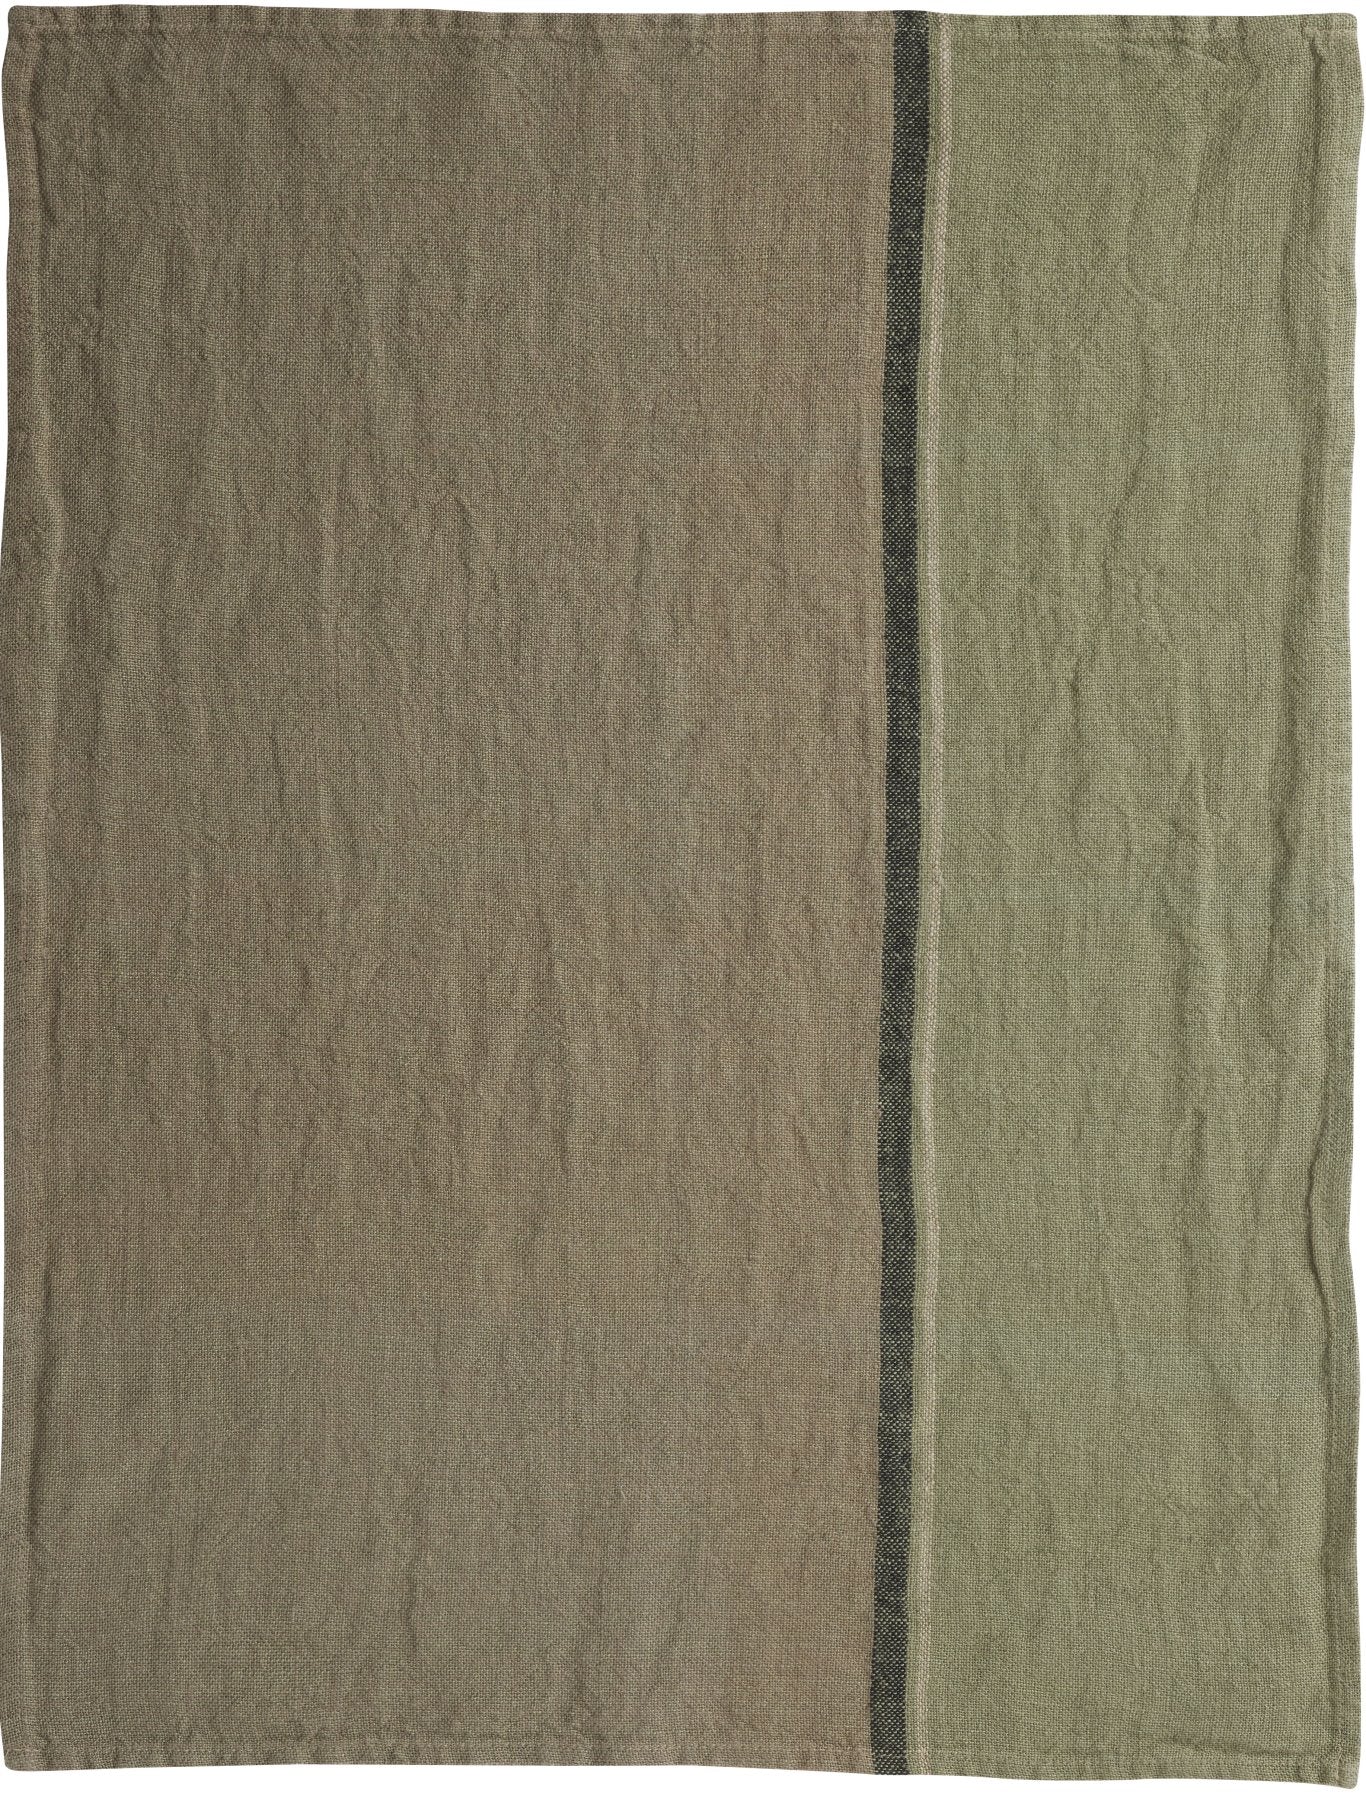 Charvet Editions "Dublin - Army", Rustic woven linen tea towel. Made in France.